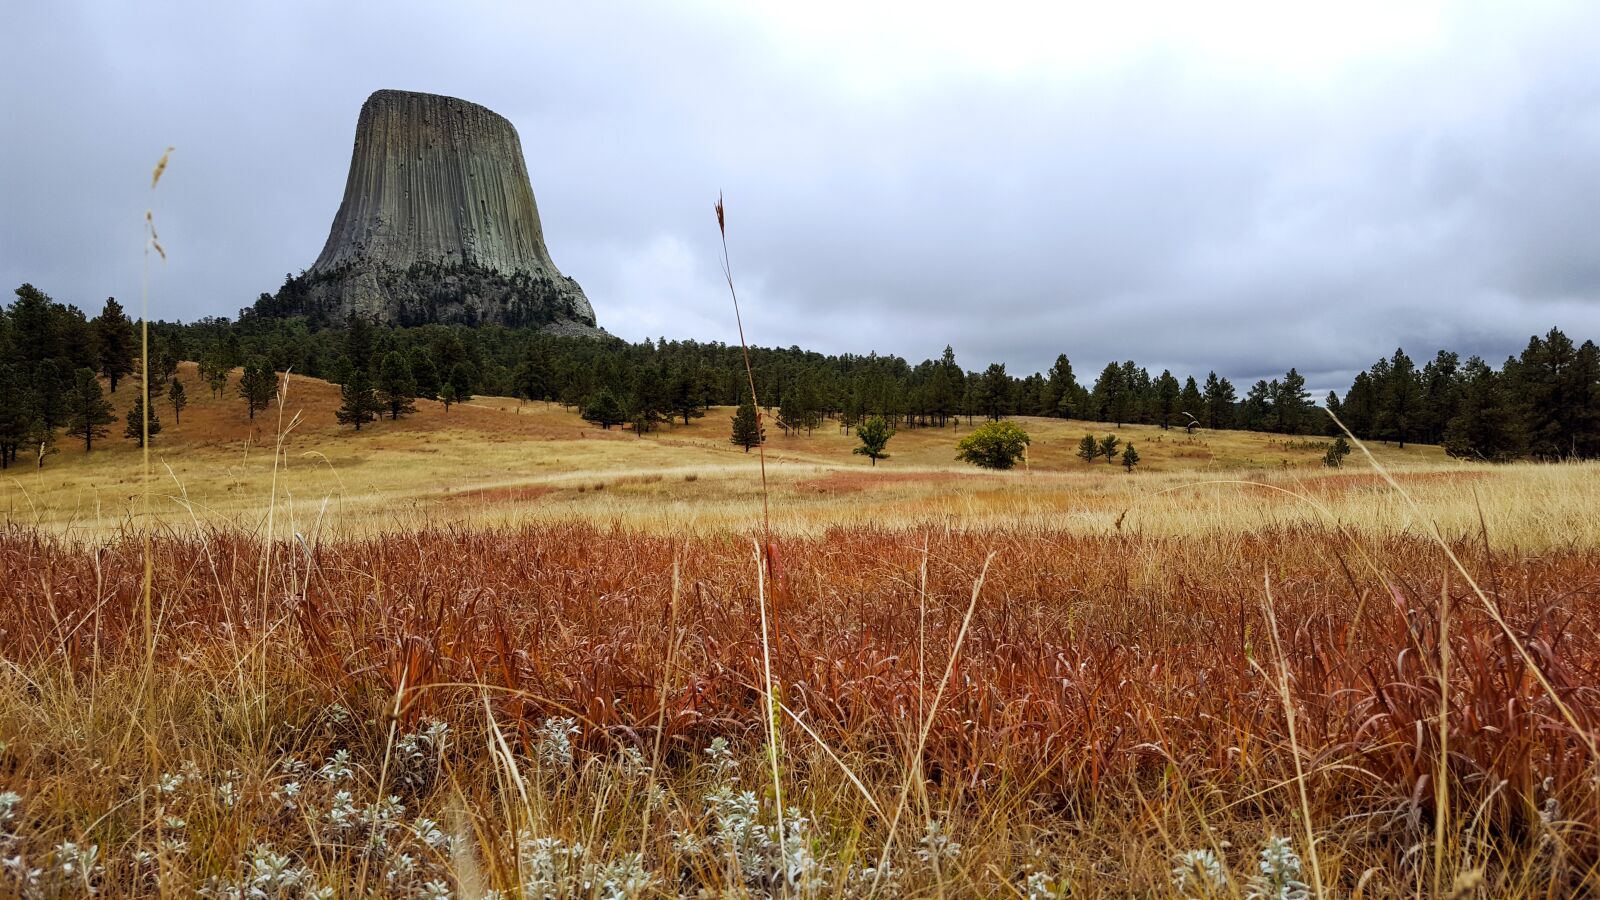 Samsung Galaxy S6 sample photo. Devils tower, landscape, national photography